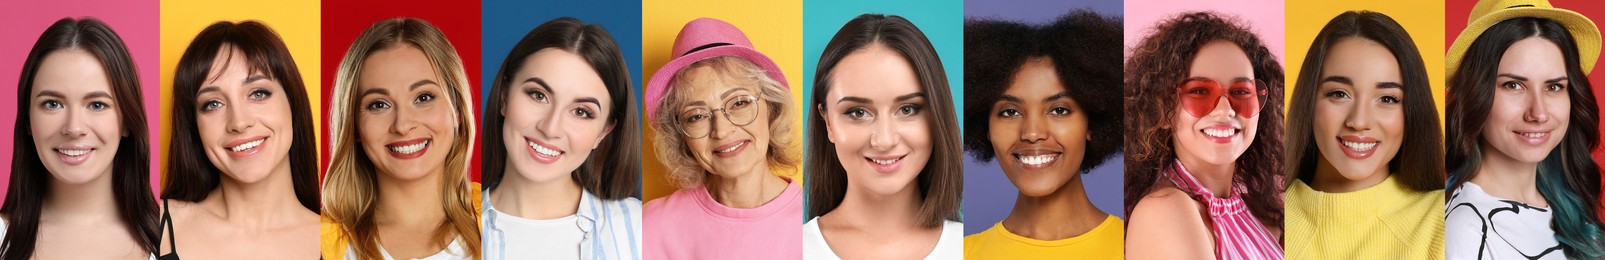 Image of Set with portraits of happy women on different color backgrounds